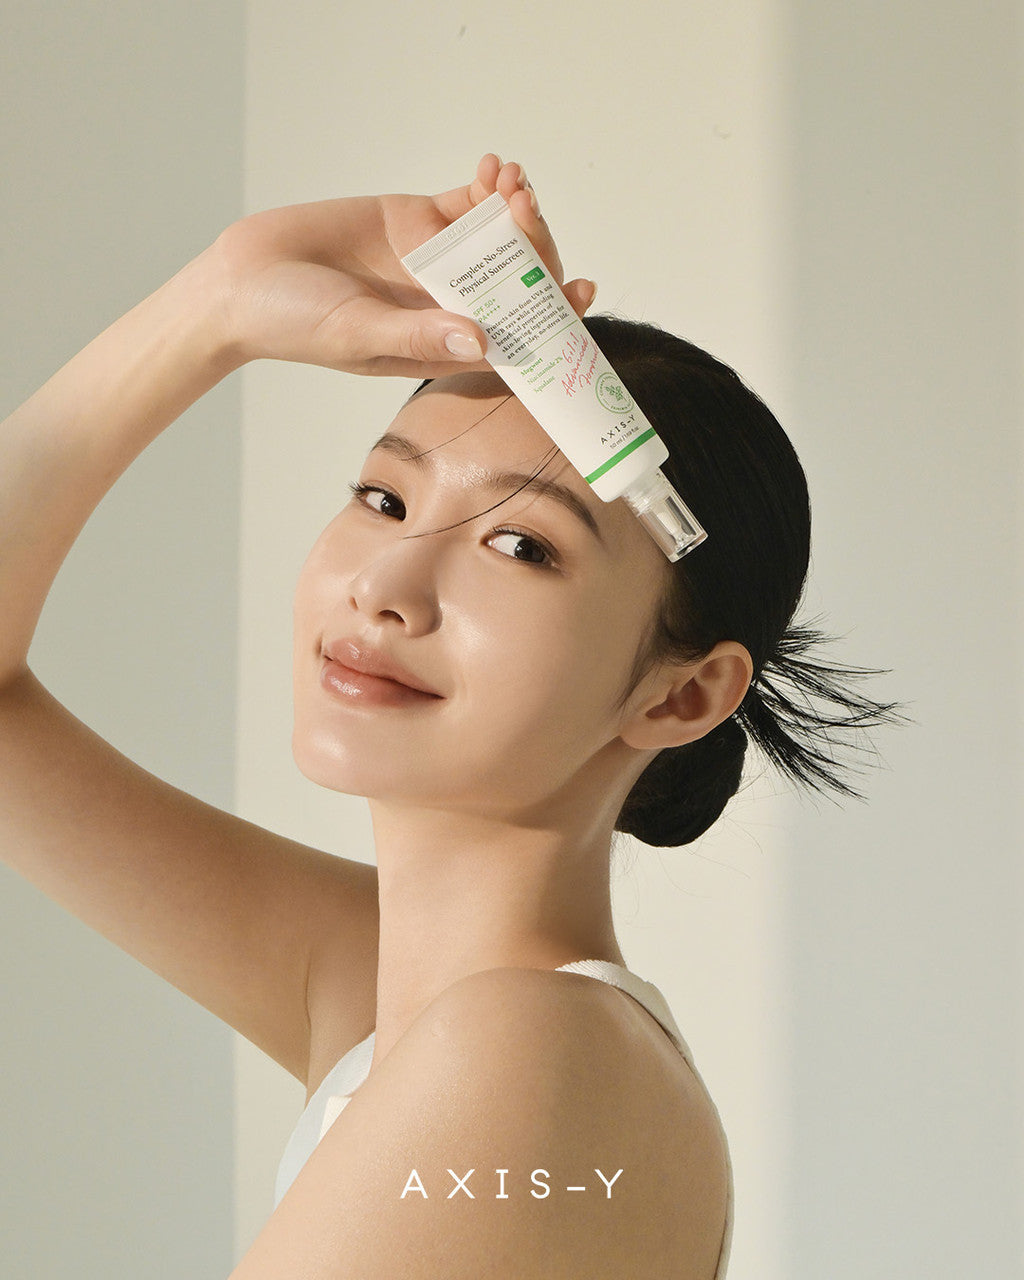 AXIS-Y_Complete_No-Stress_Physical_Sun_Cream_50_mL_KBeauty_Australia_-_model_holding_product__47305.jpg